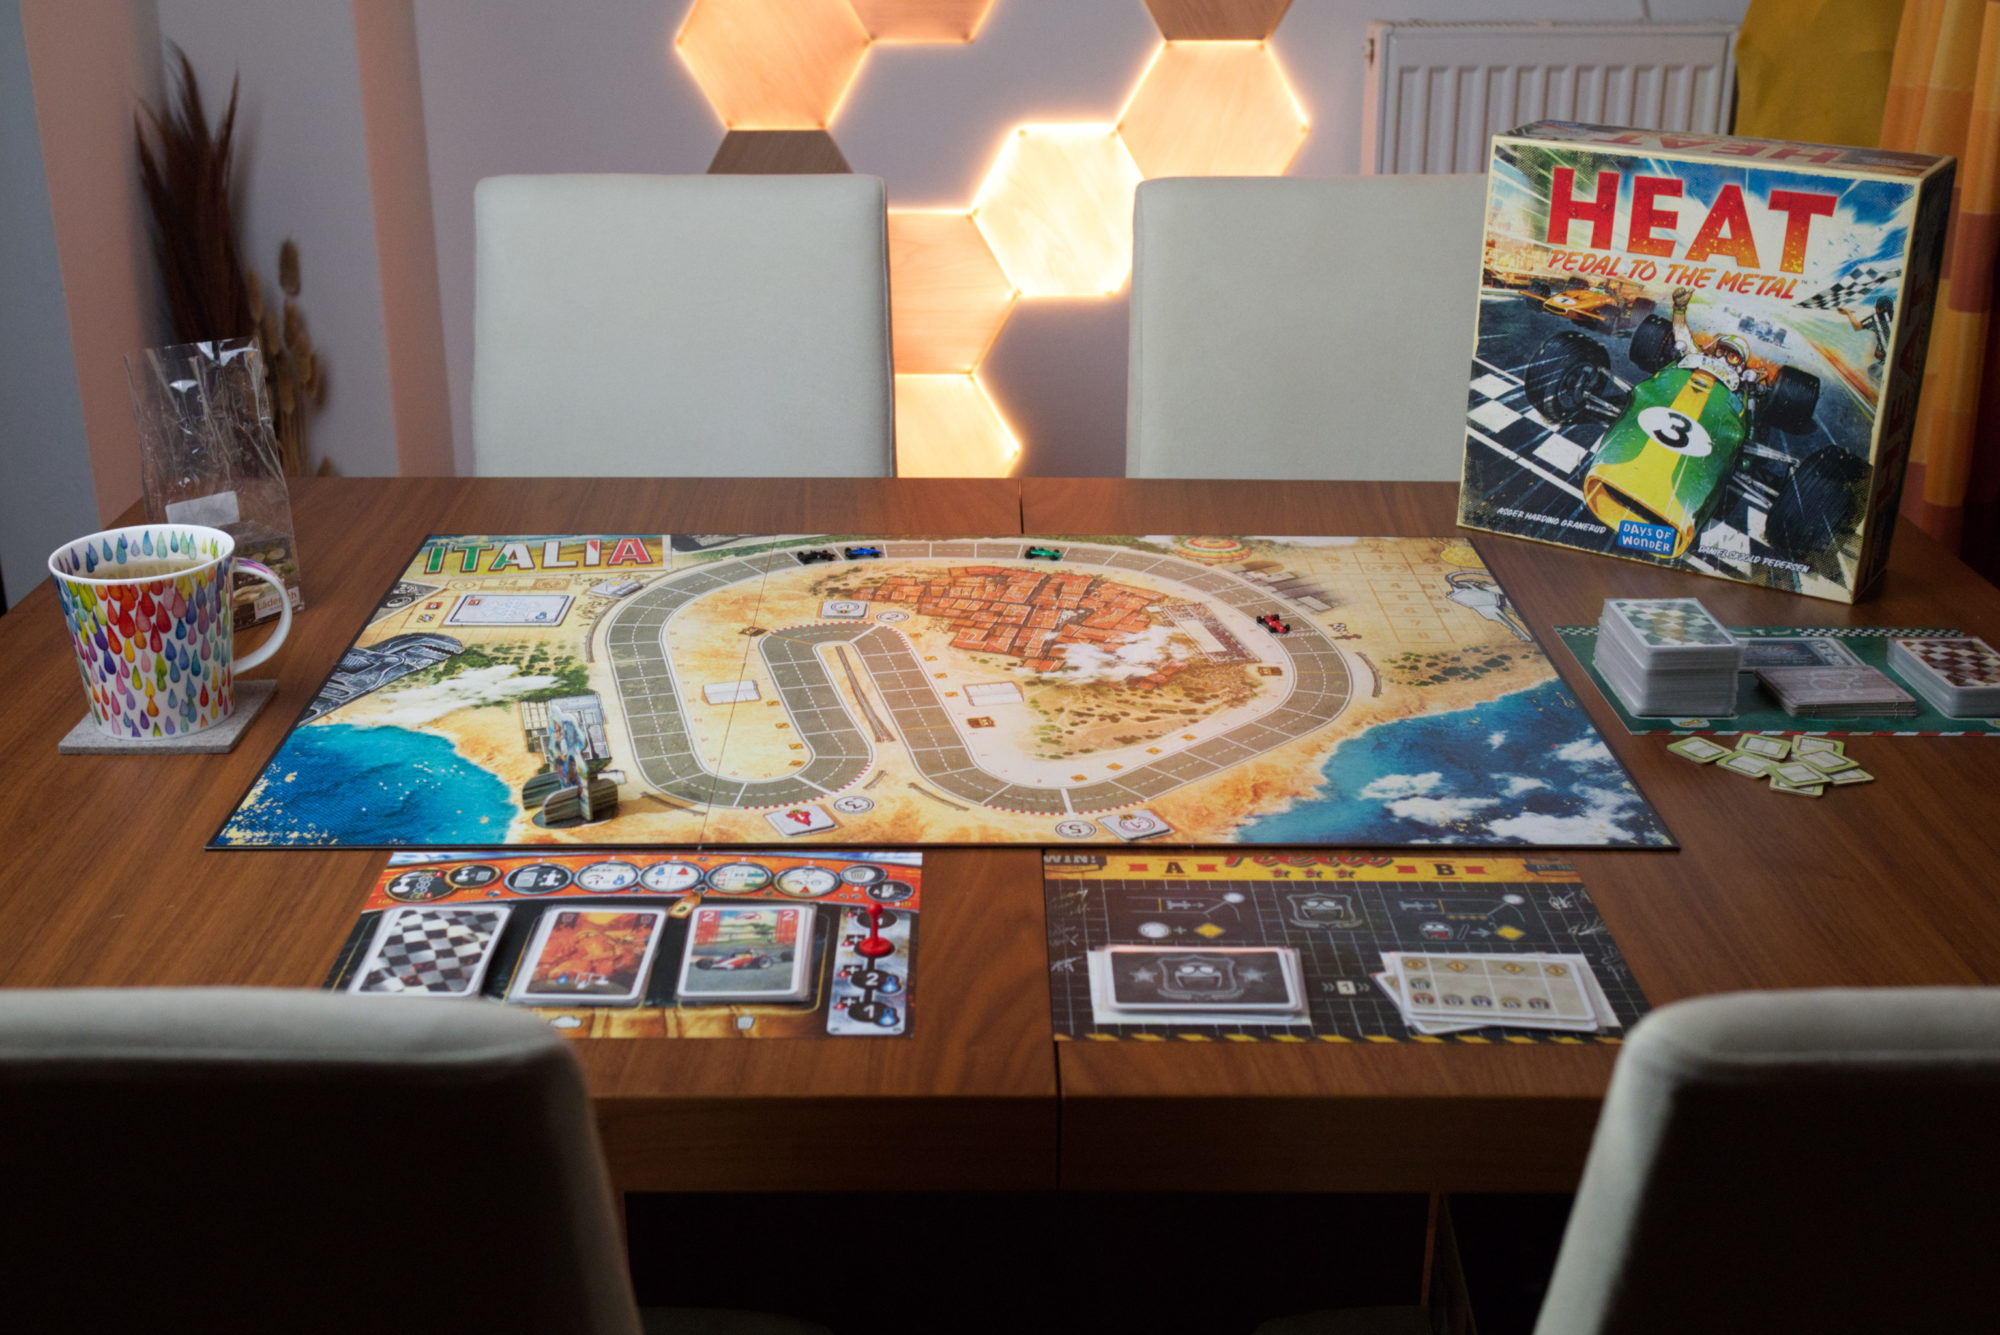 Heat: Pedal to the Metal board game table setup